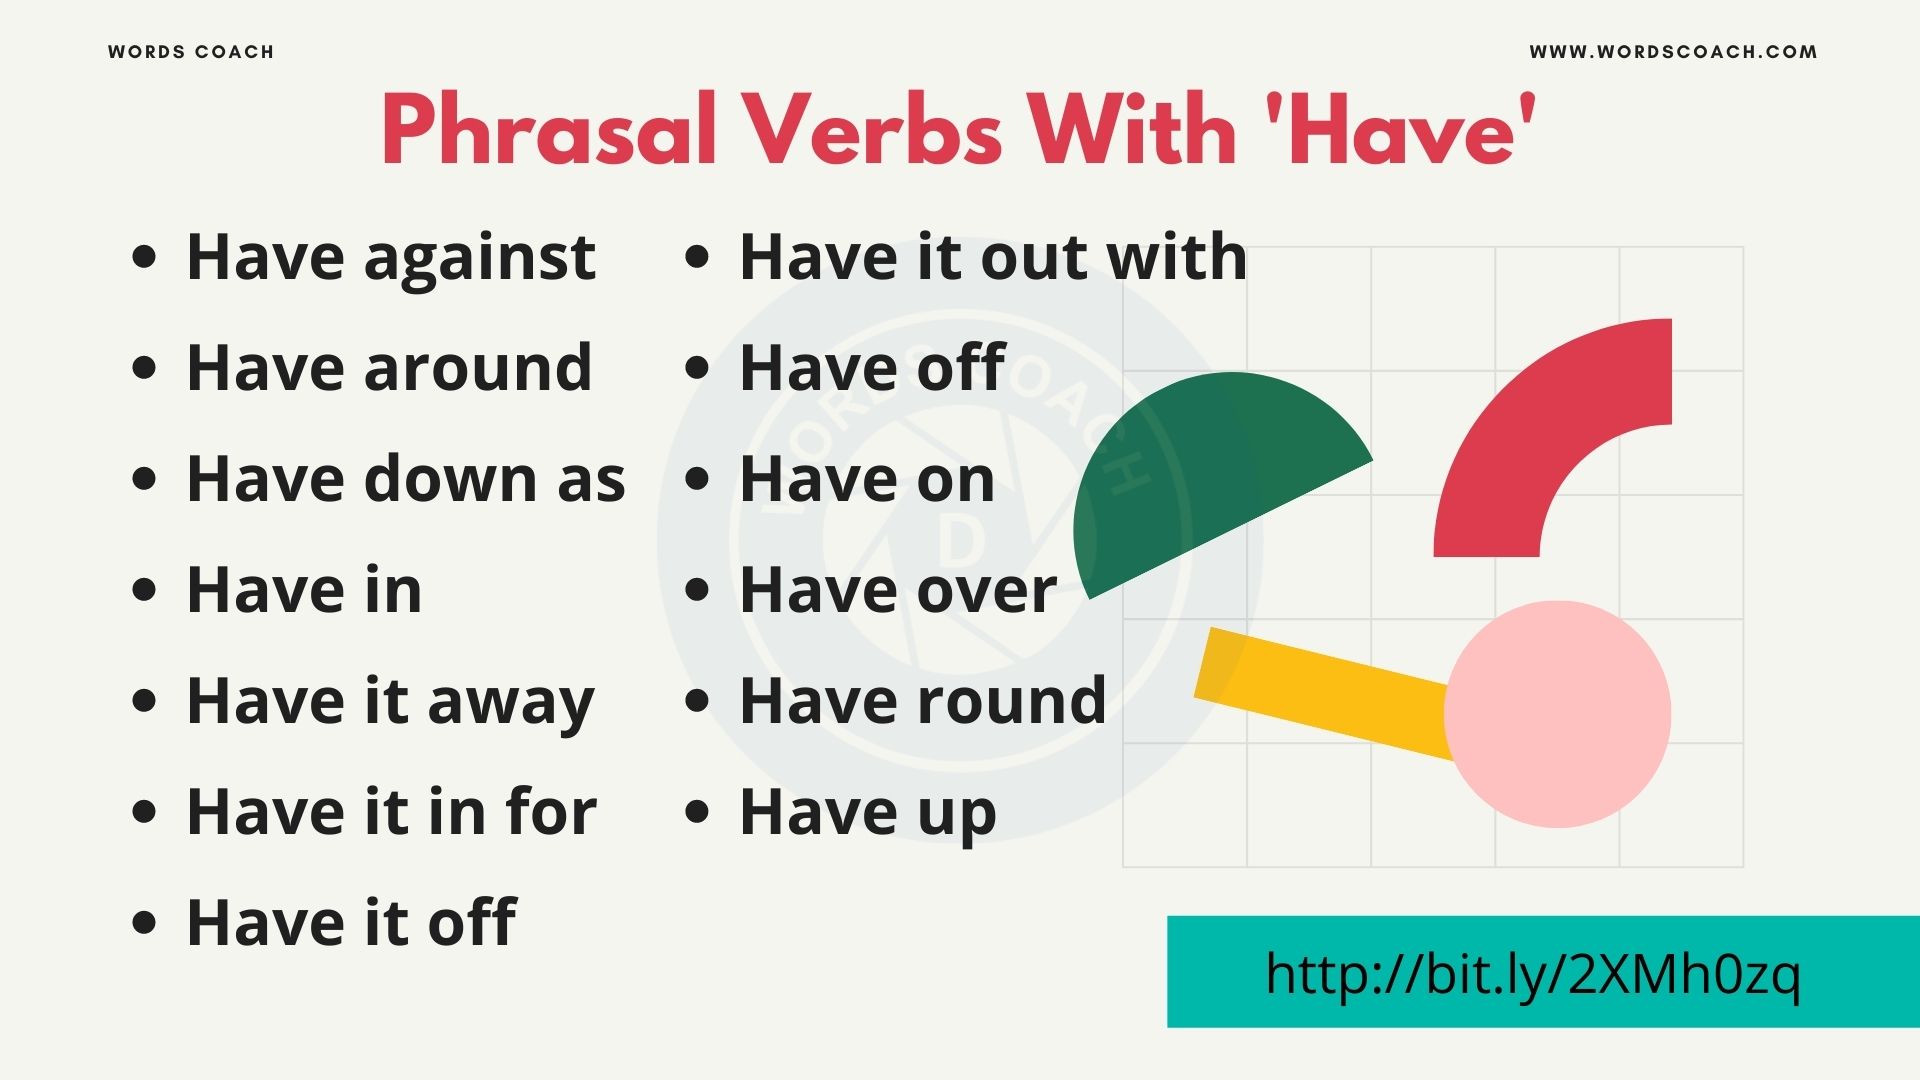 Phrasal Verbs With 'Have' - wordscoach.com